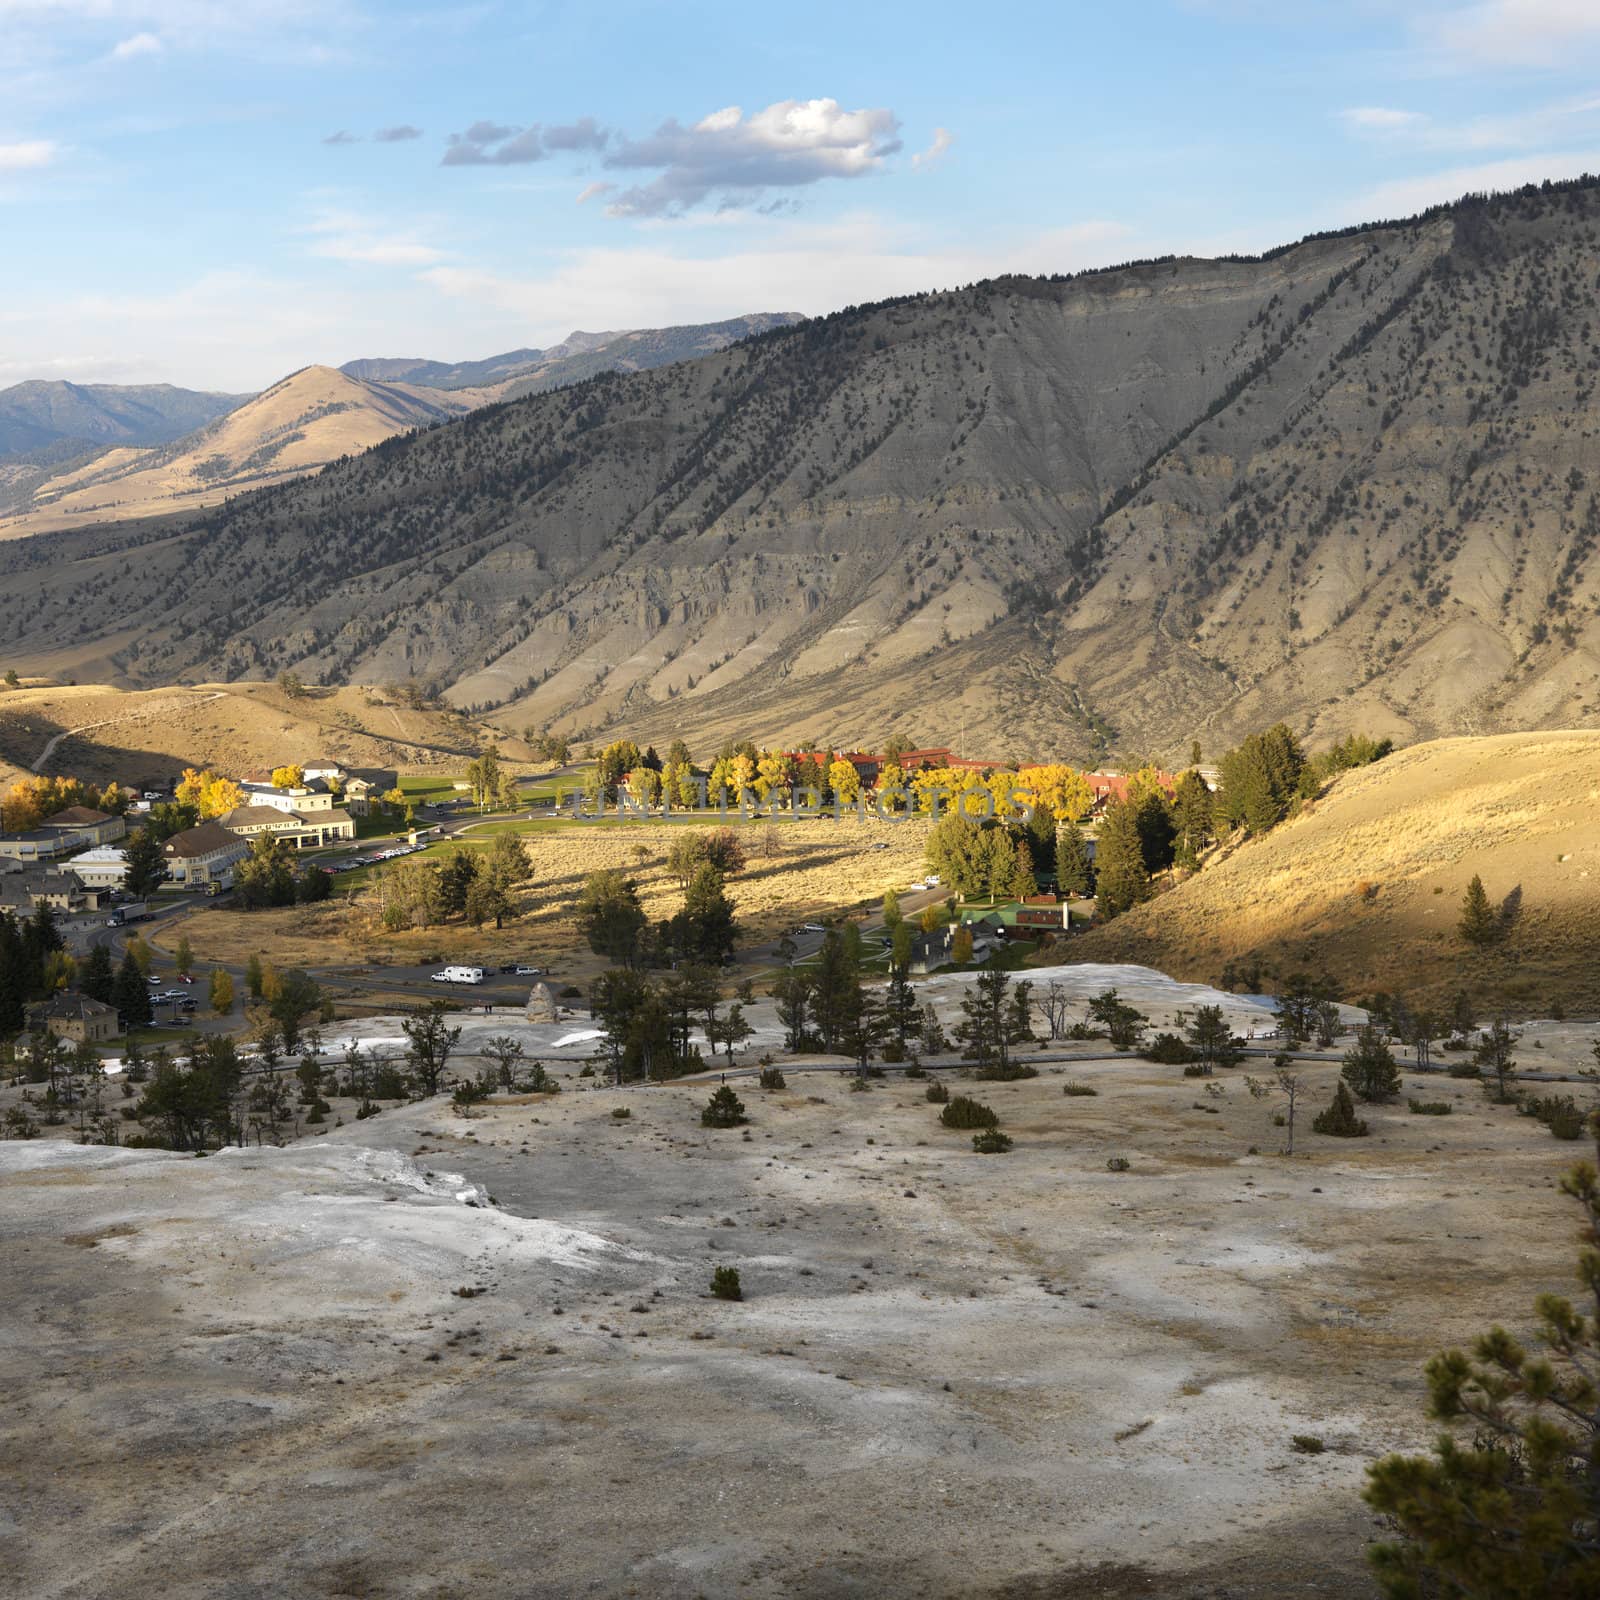 Landscape of valley and mountains at Yellowstone National Park, Wyoming.